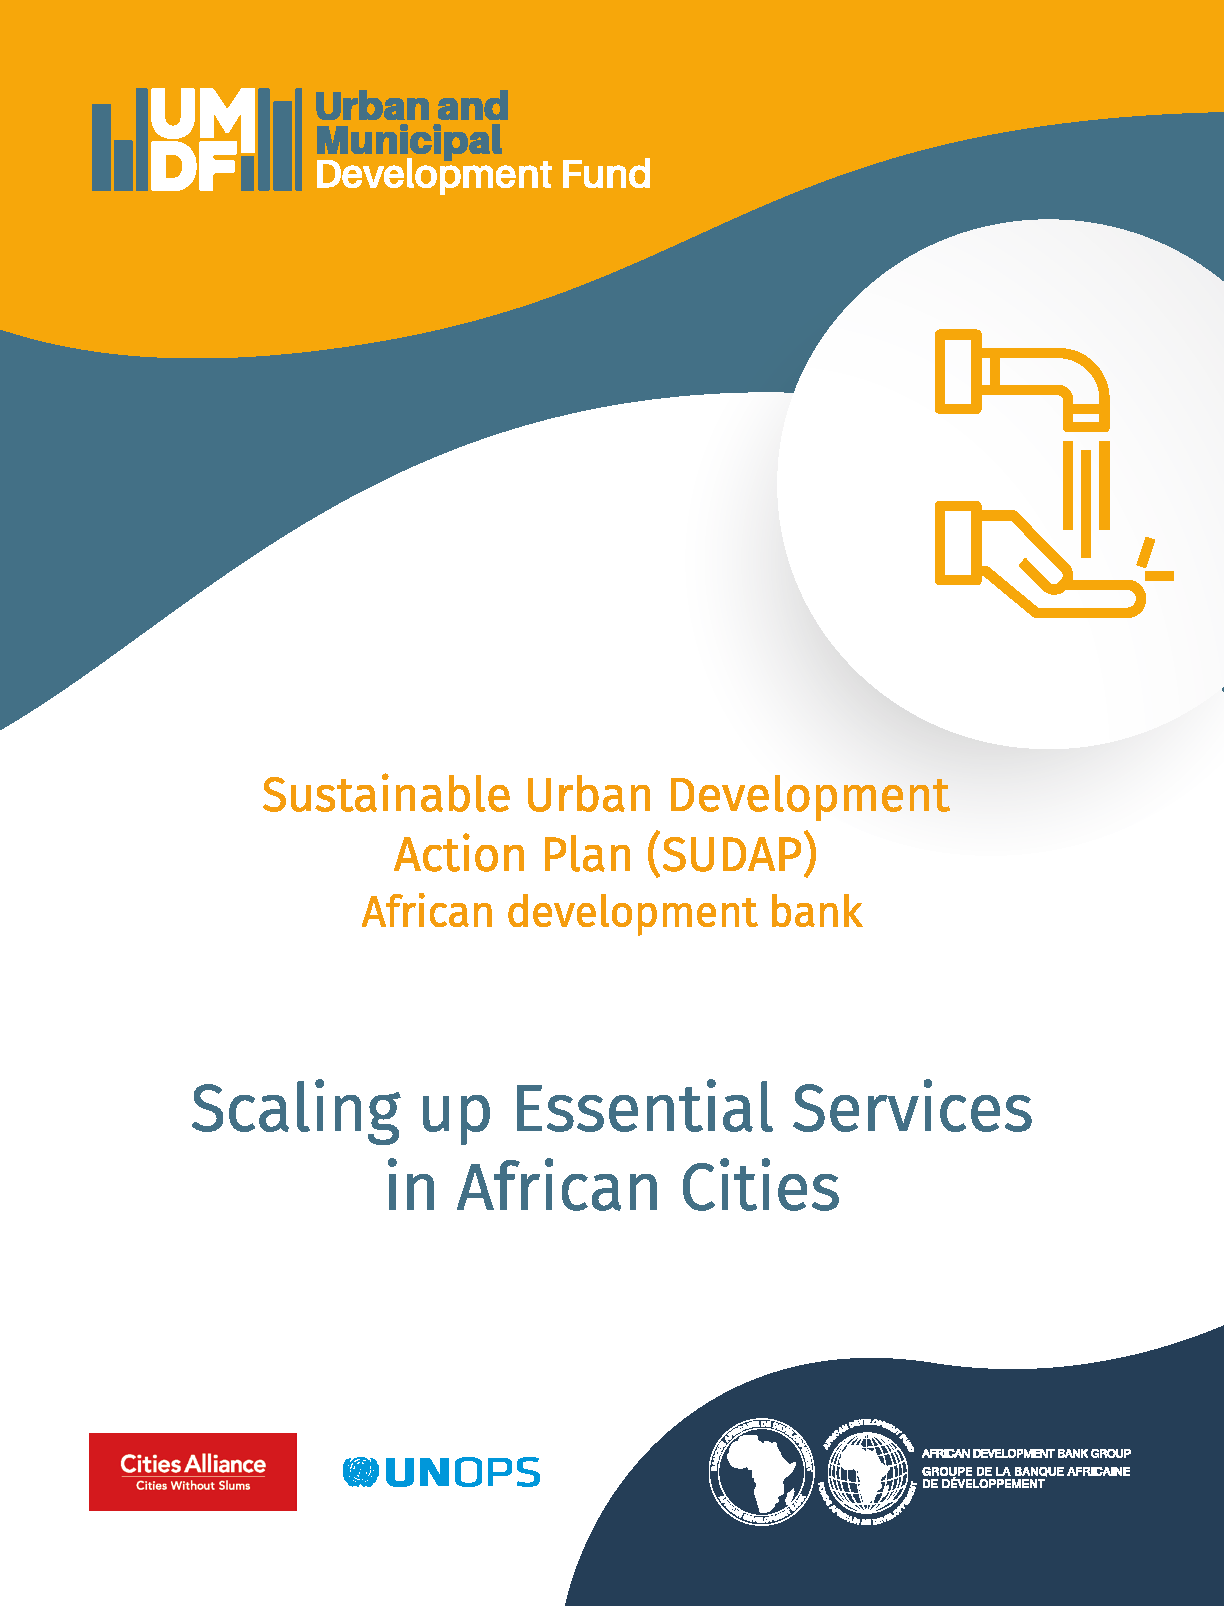 Scaling up Essential Services in African Cities_CitiesAlliance_UNOPS_AfDB